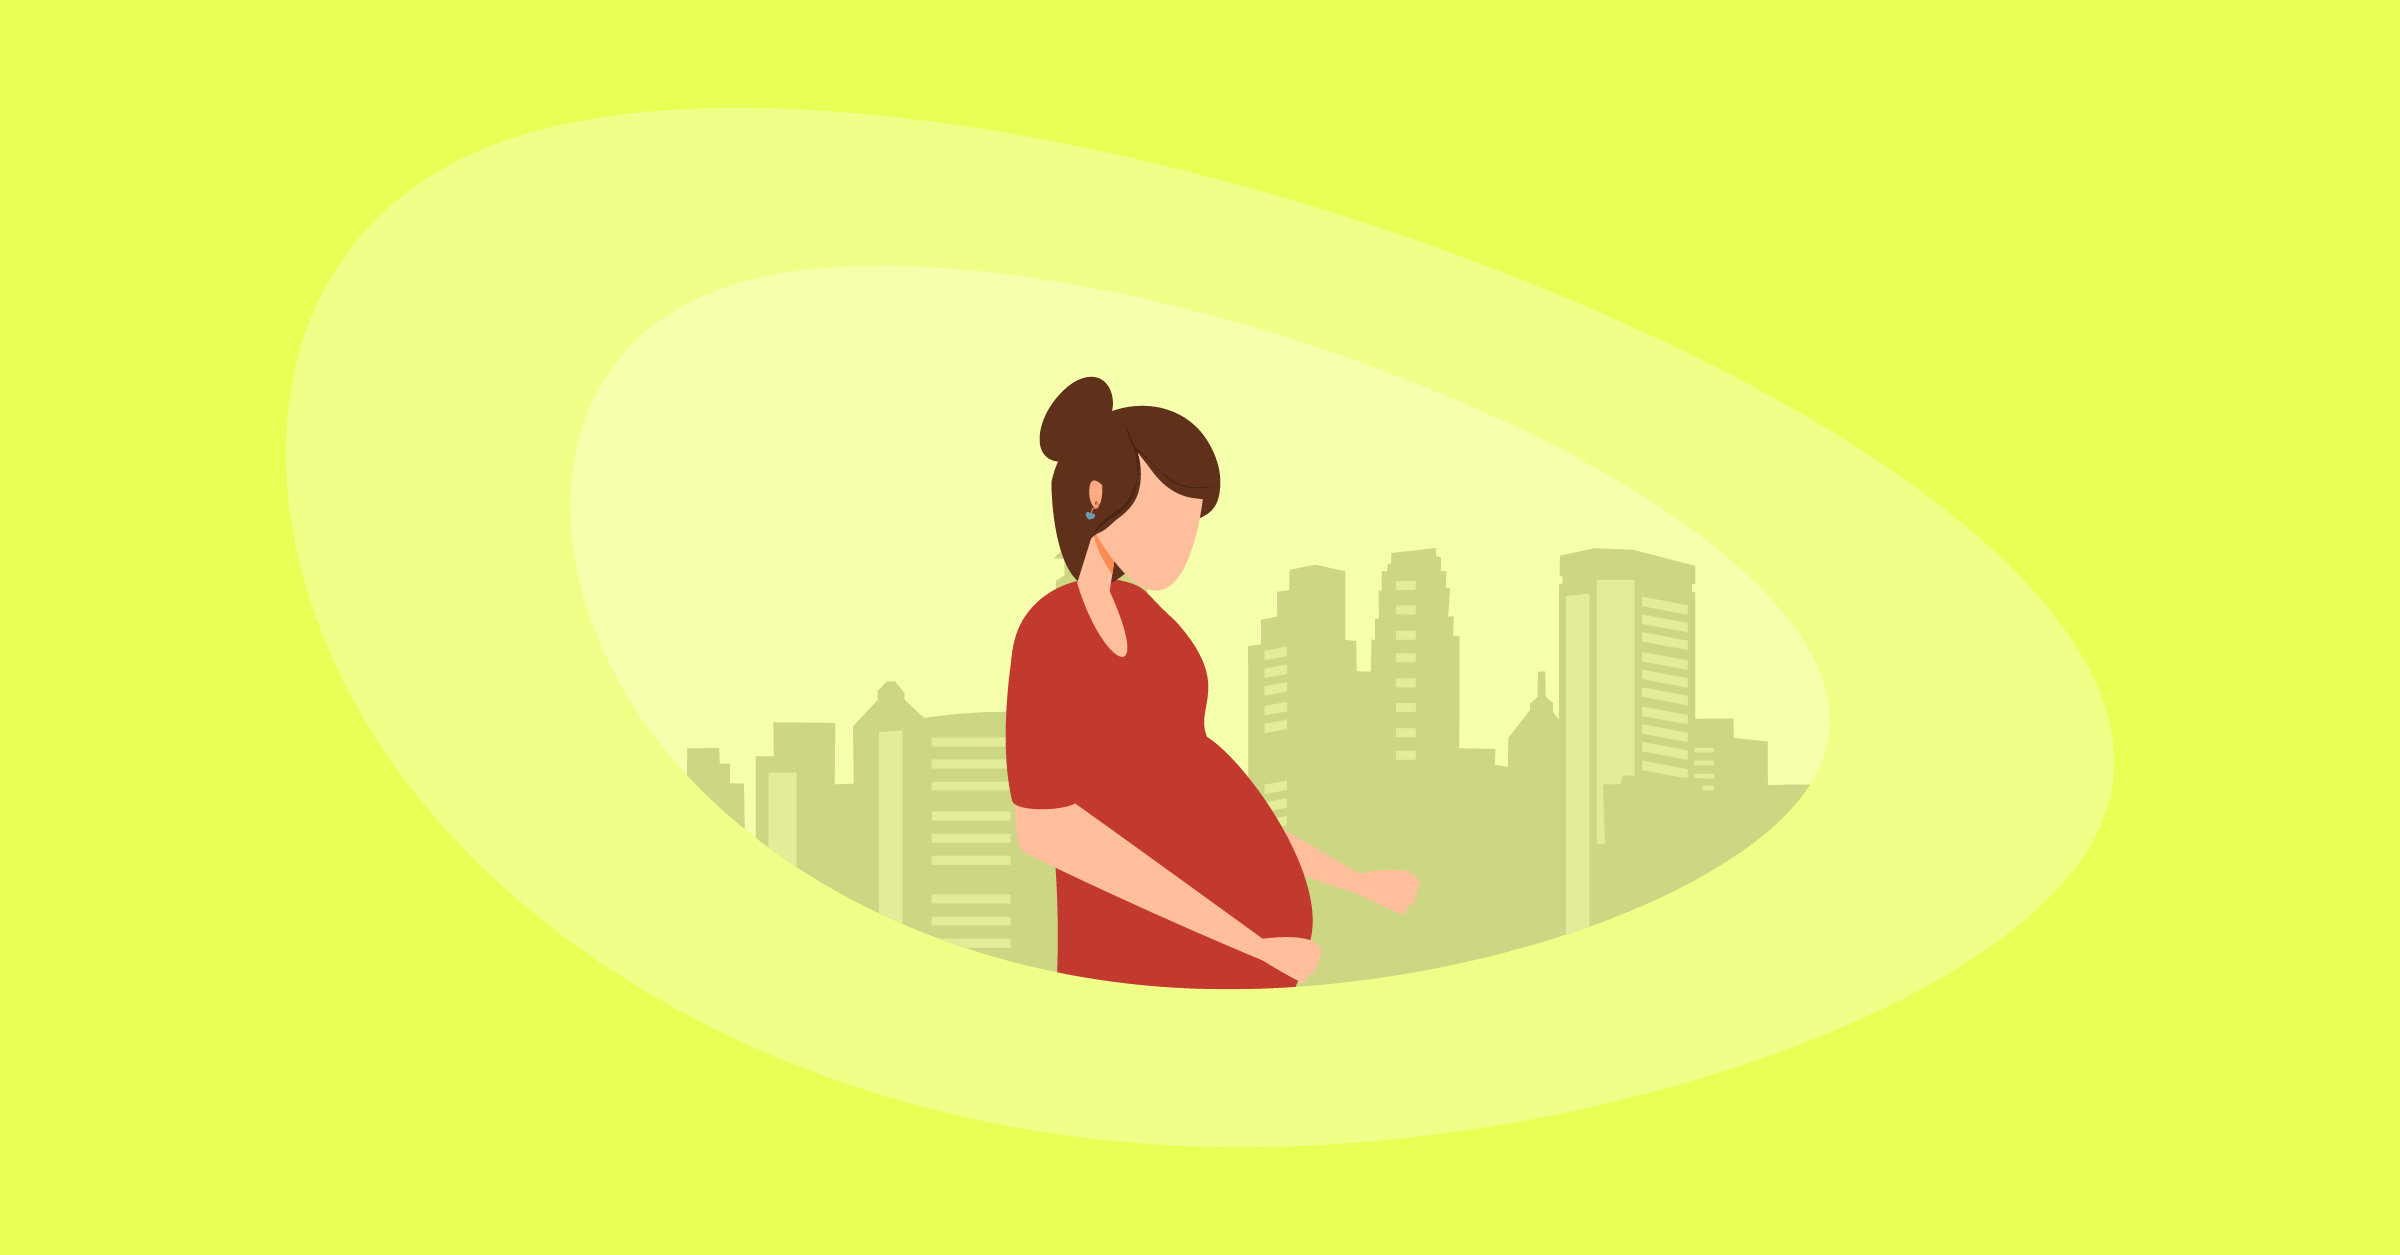 Illustration of a pregnant woman